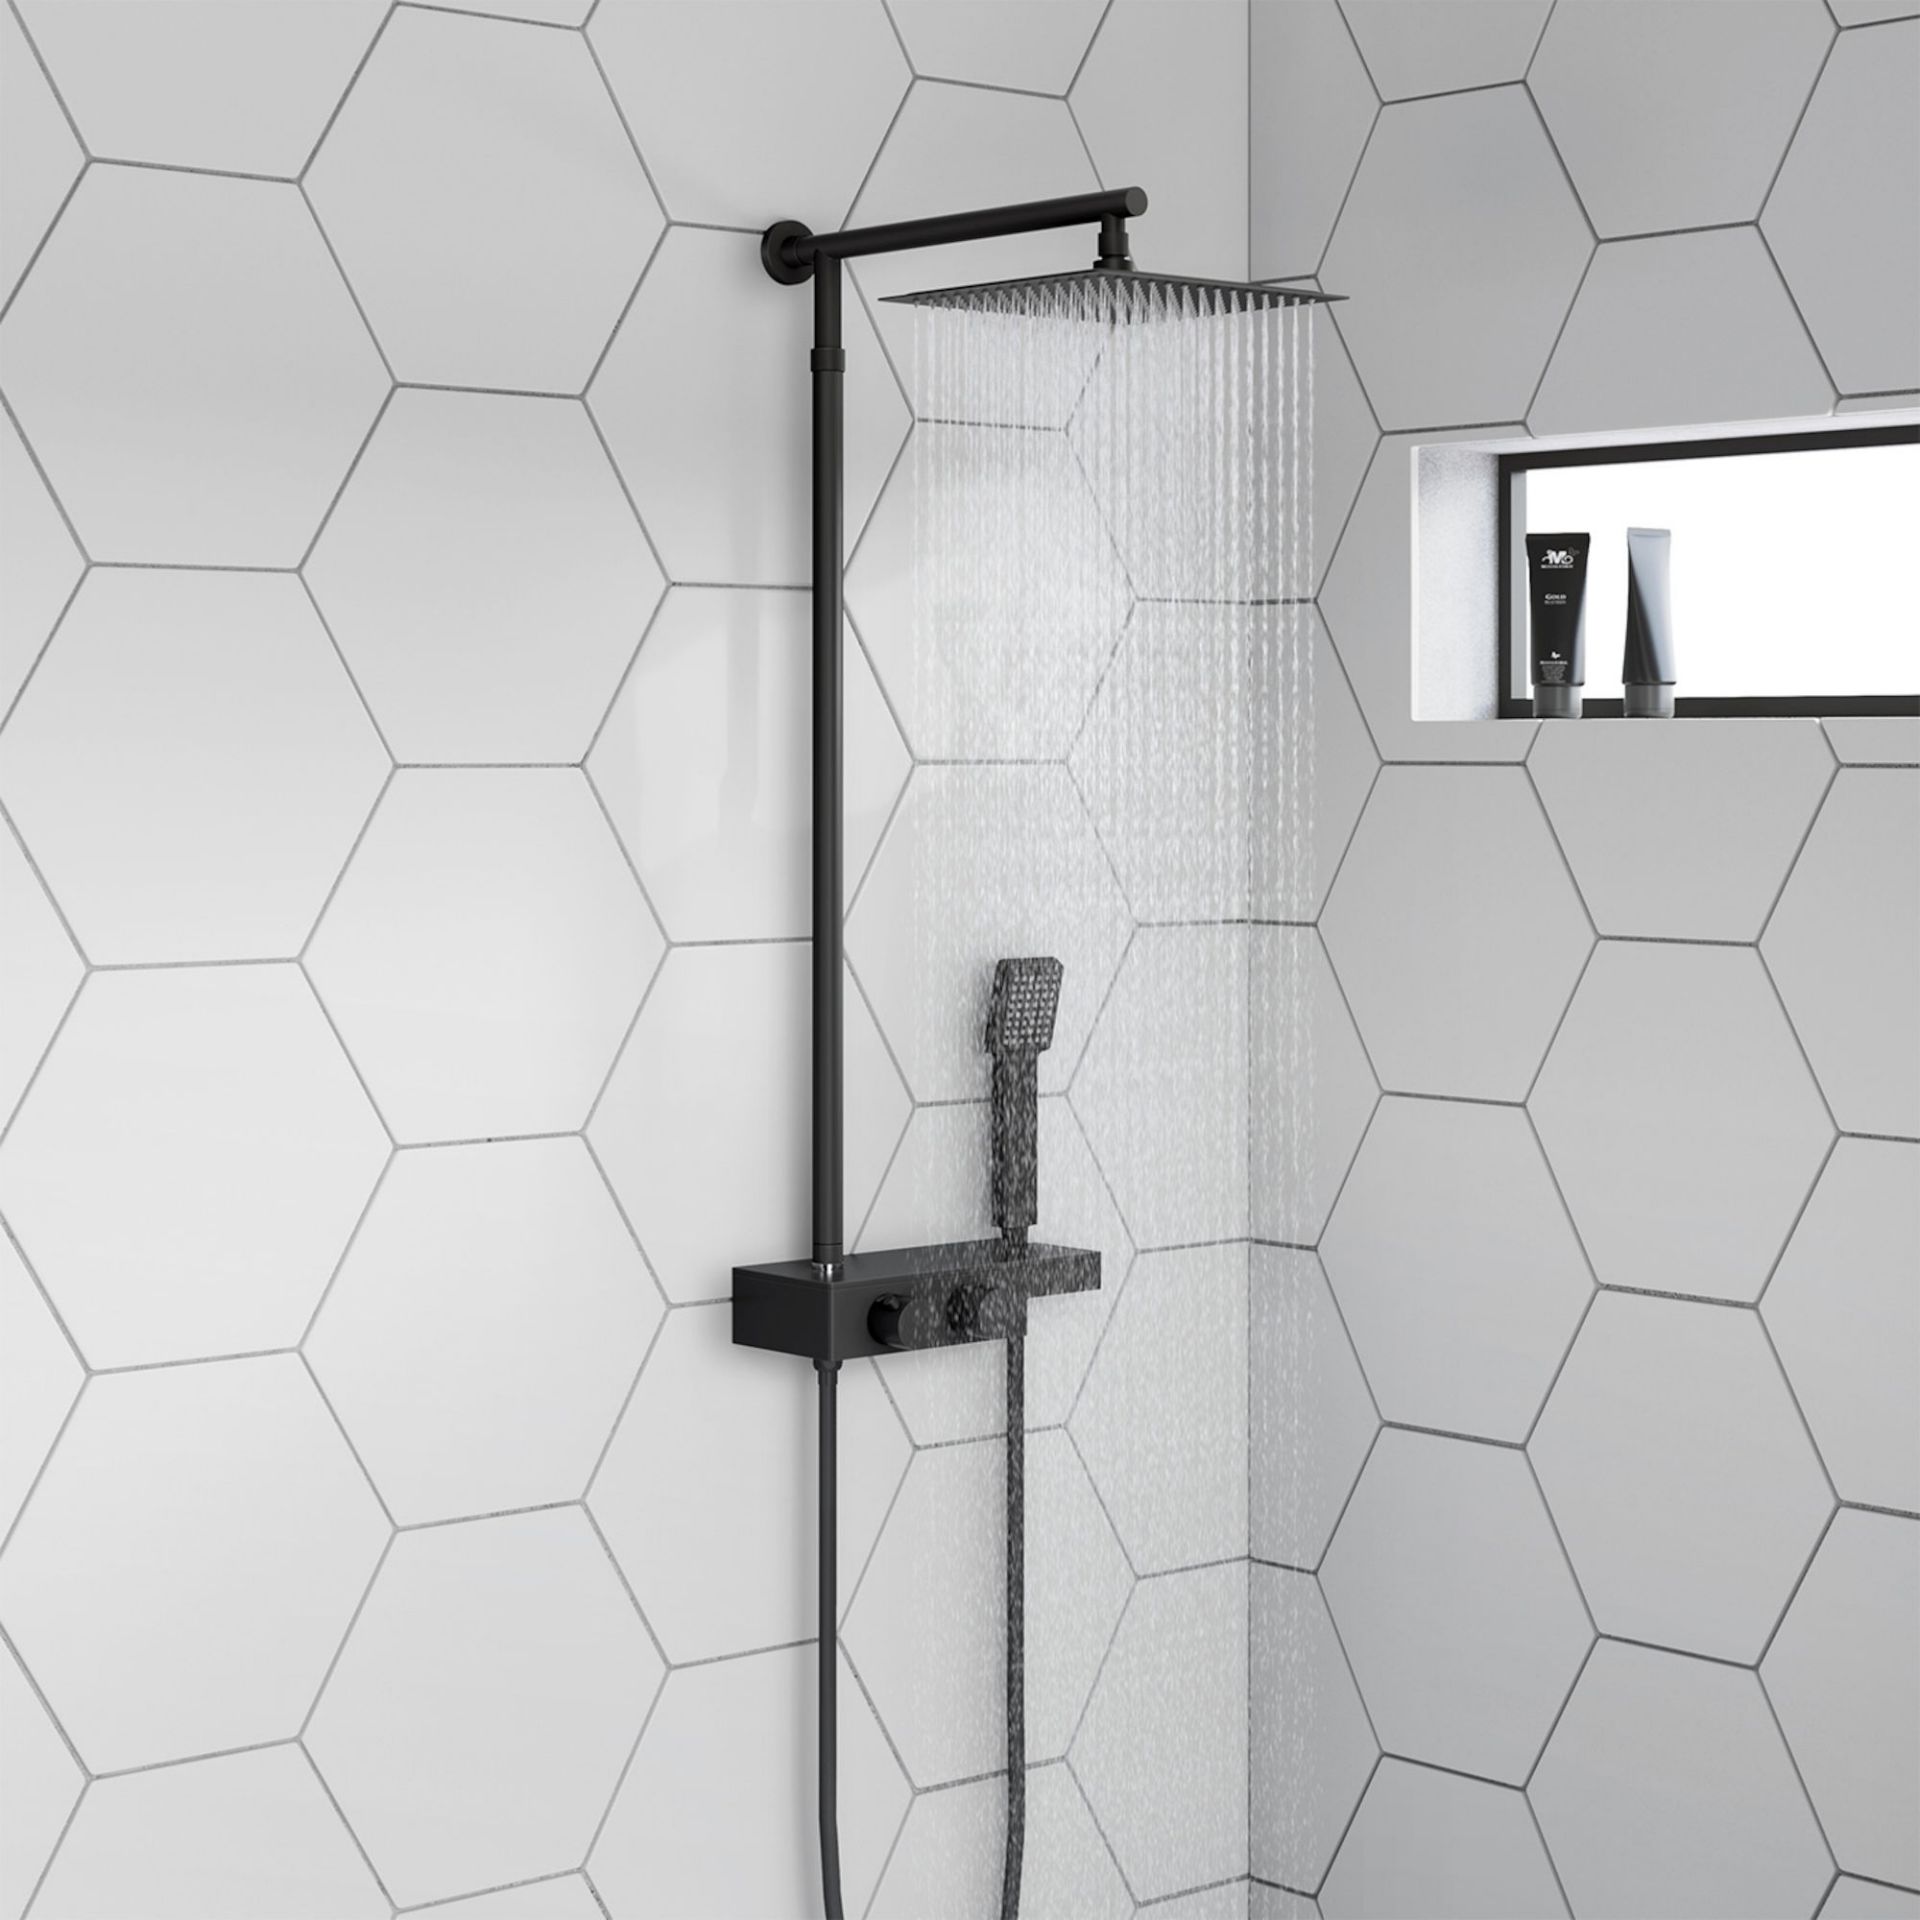 (MW36) Matte Black Square Thermostatic Mixer Shower Kit & Shelf. RRP £474.99. Manufactured from long